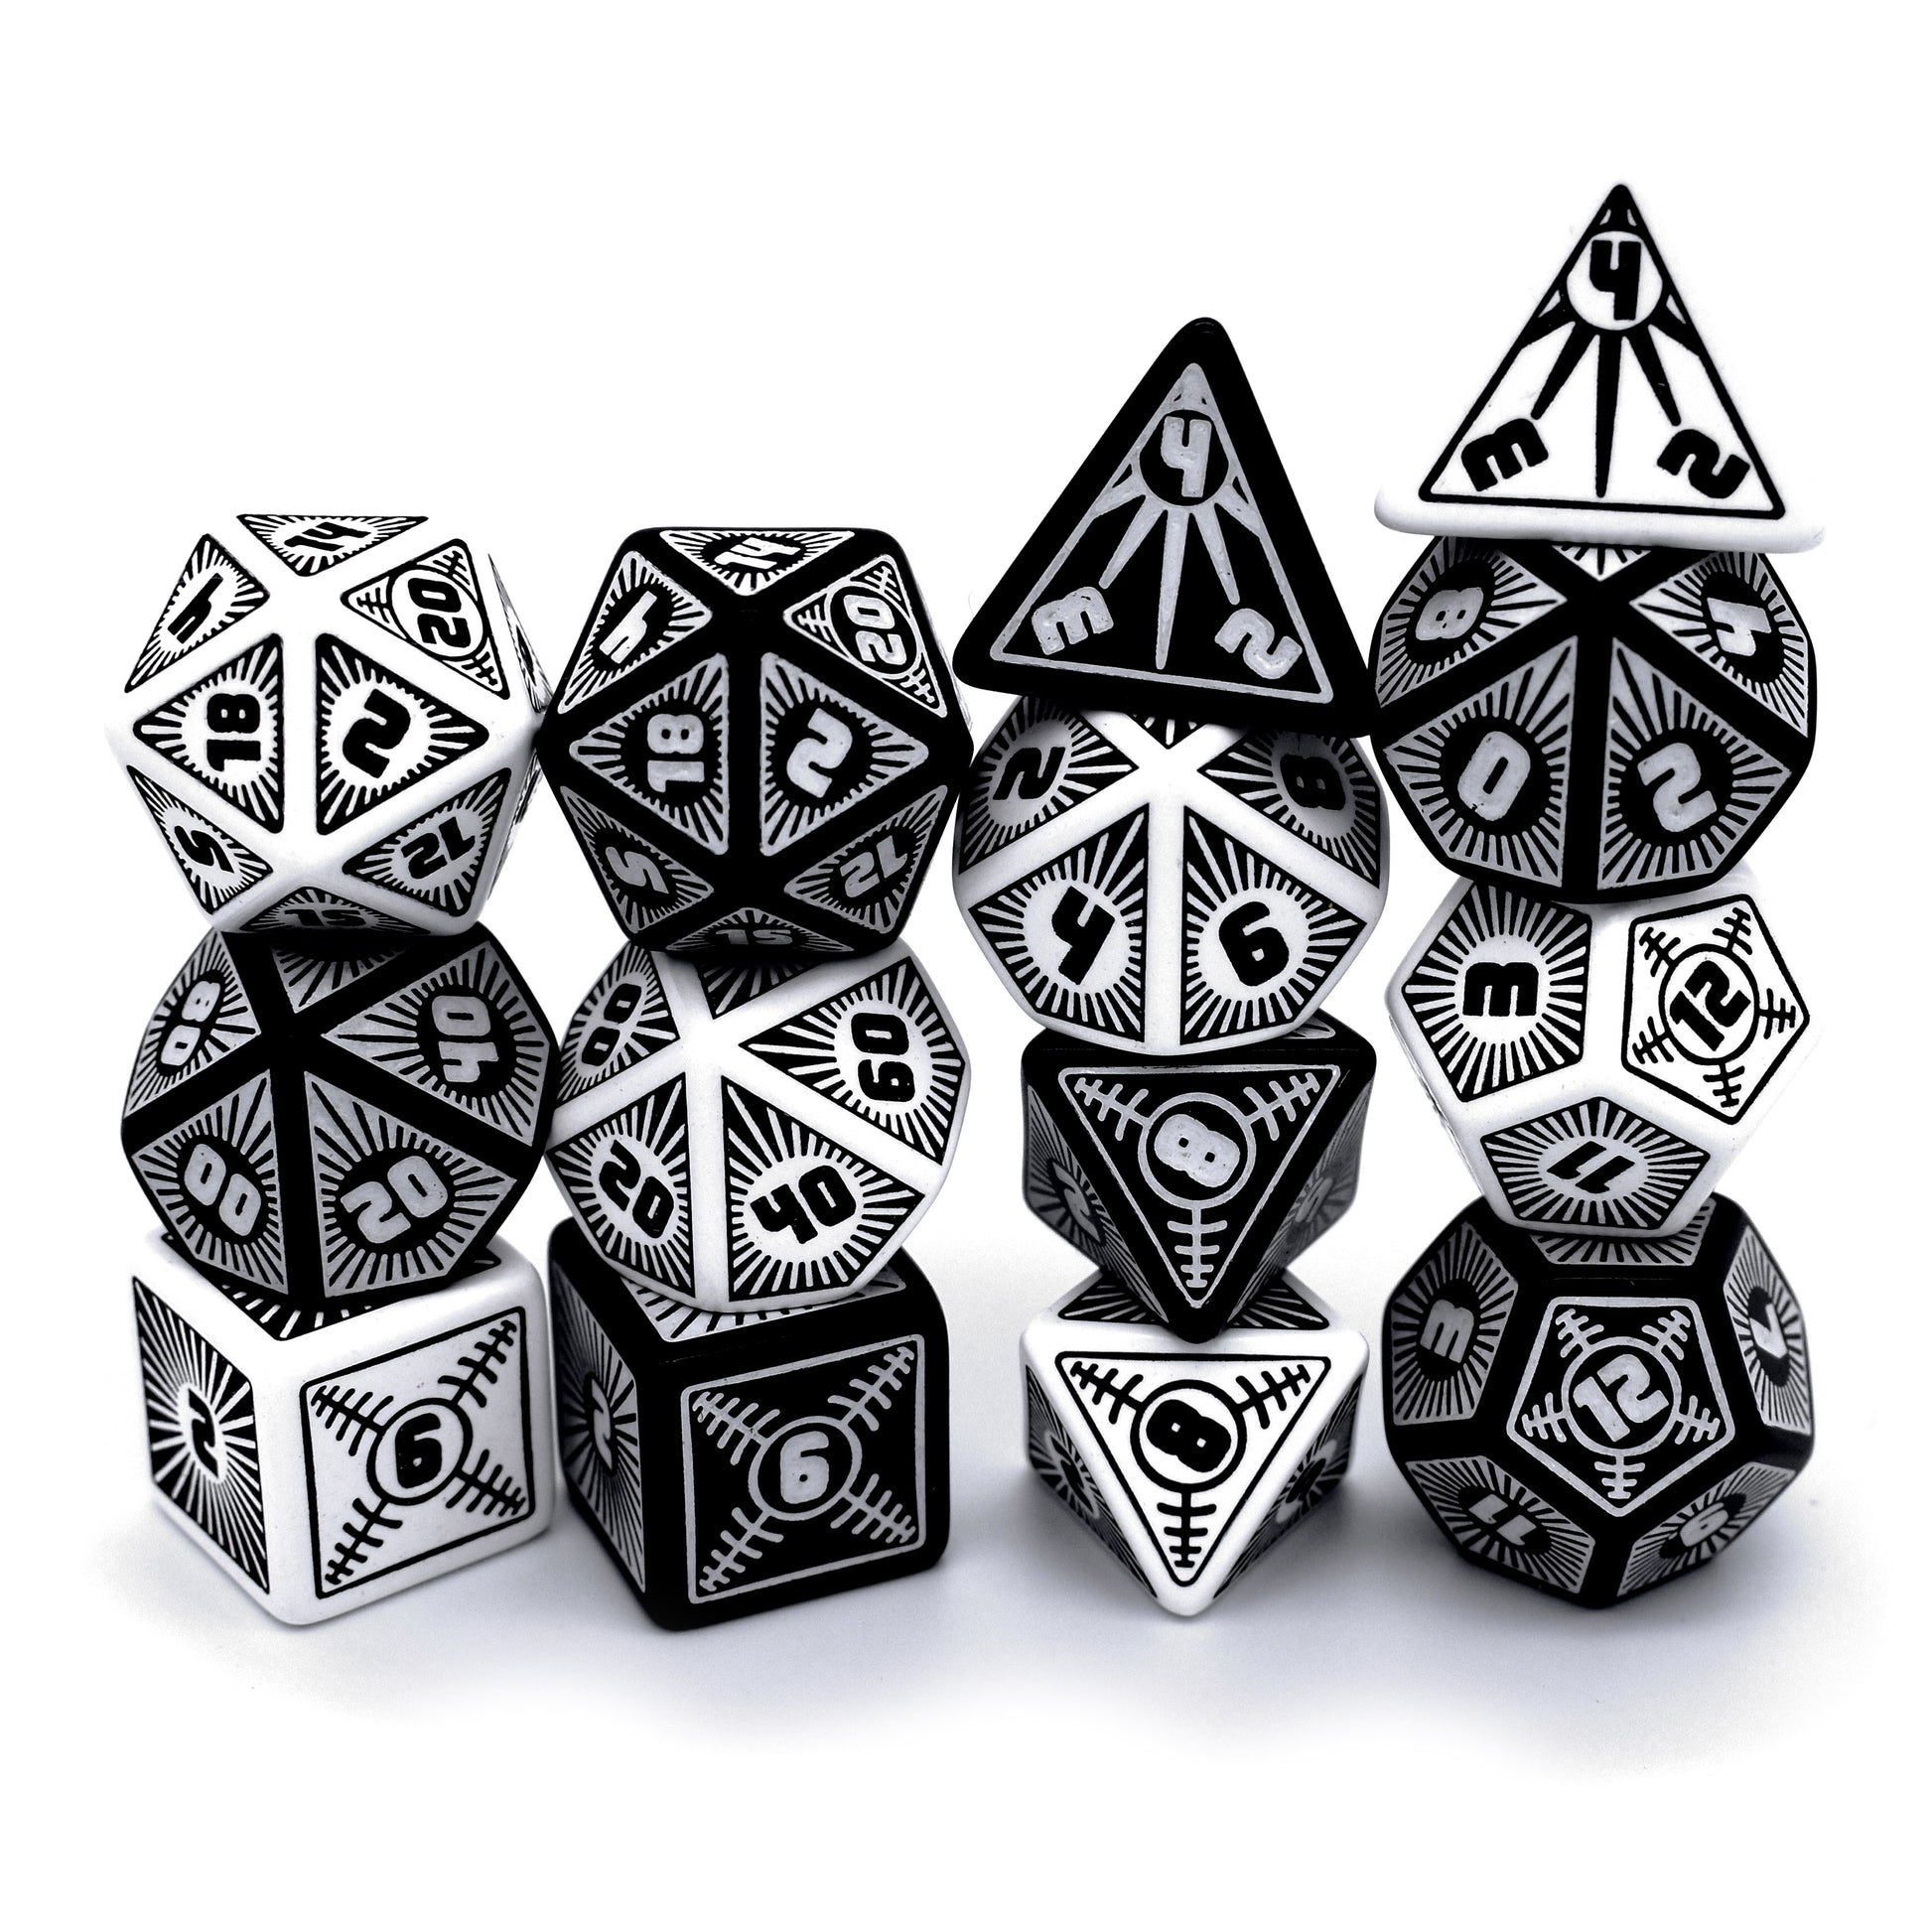 Alpha and Omega, 7-piece engraved black and white resin sets